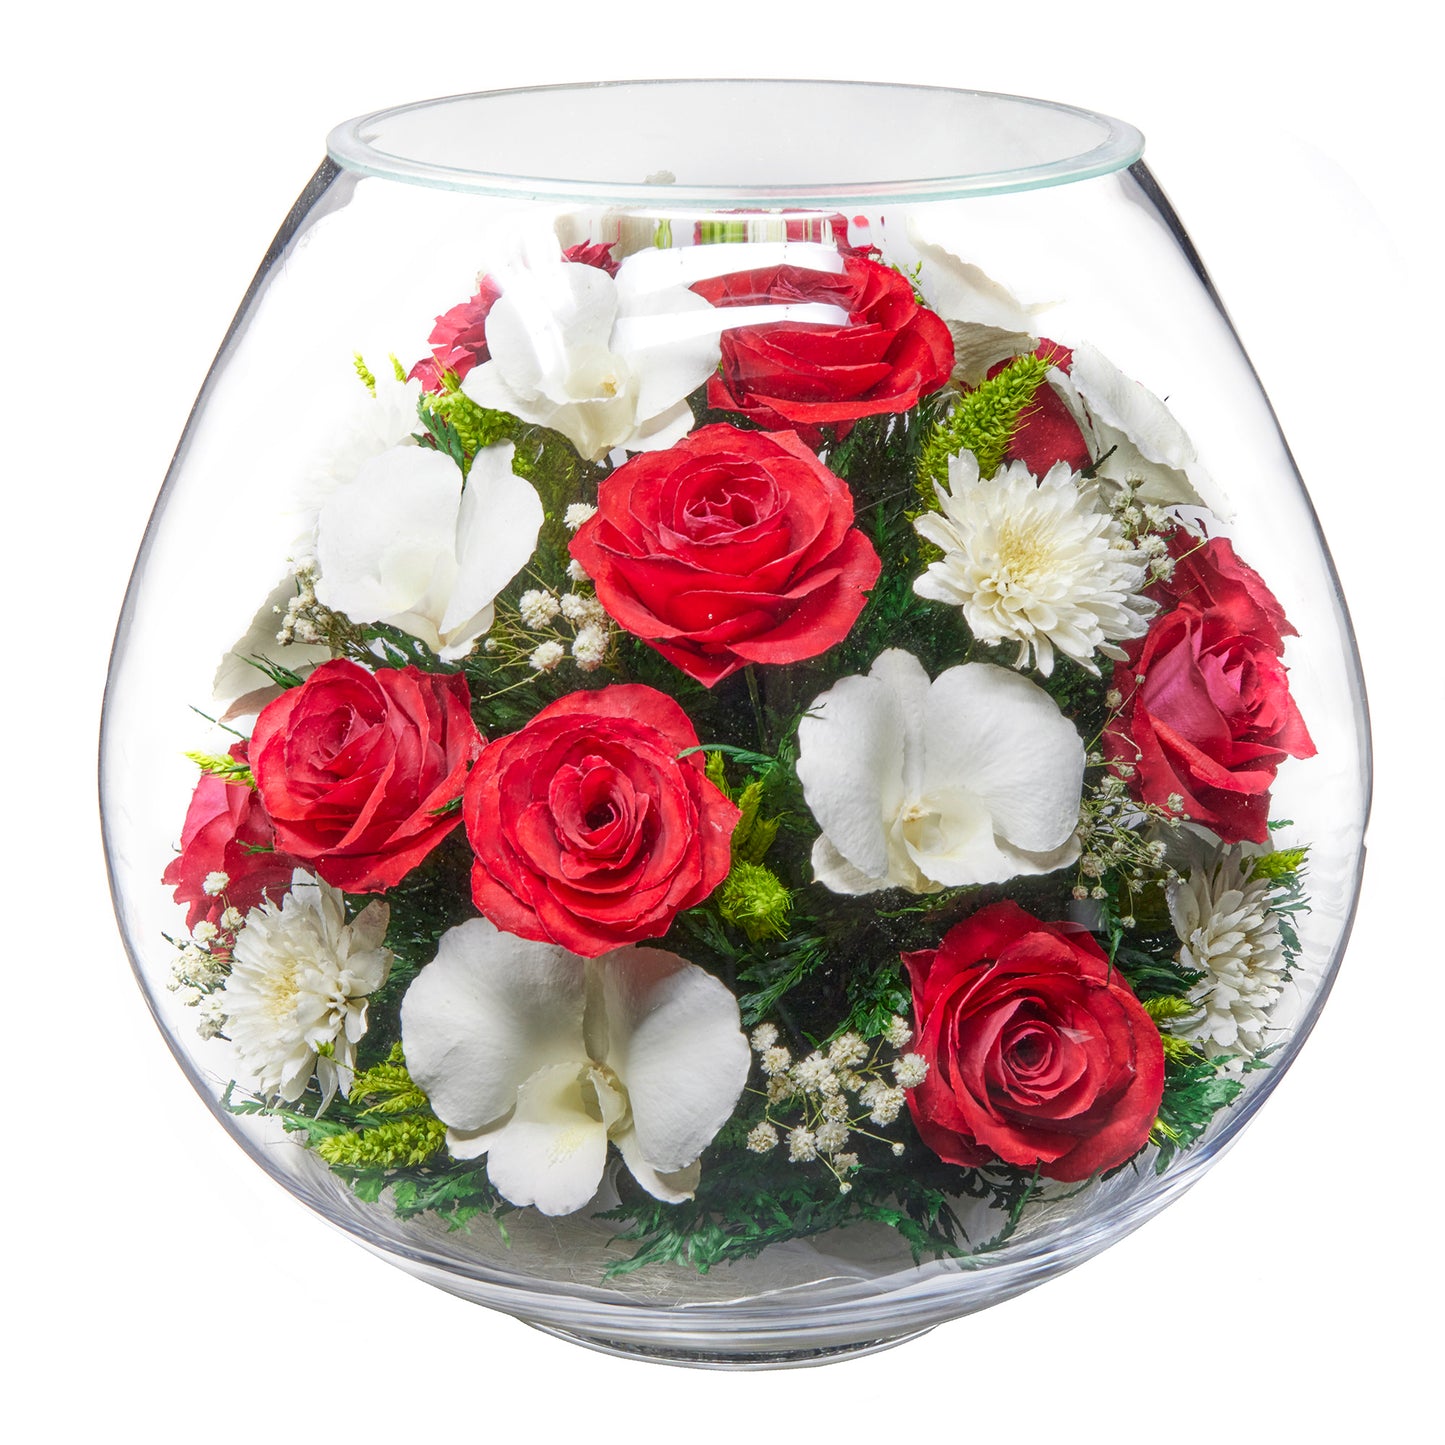 In Flores Veritas: Rose and Orchid Harmony Grand Bowl Vase - Lasts up to 5 Years - Luxurious Gift for Any Occasion